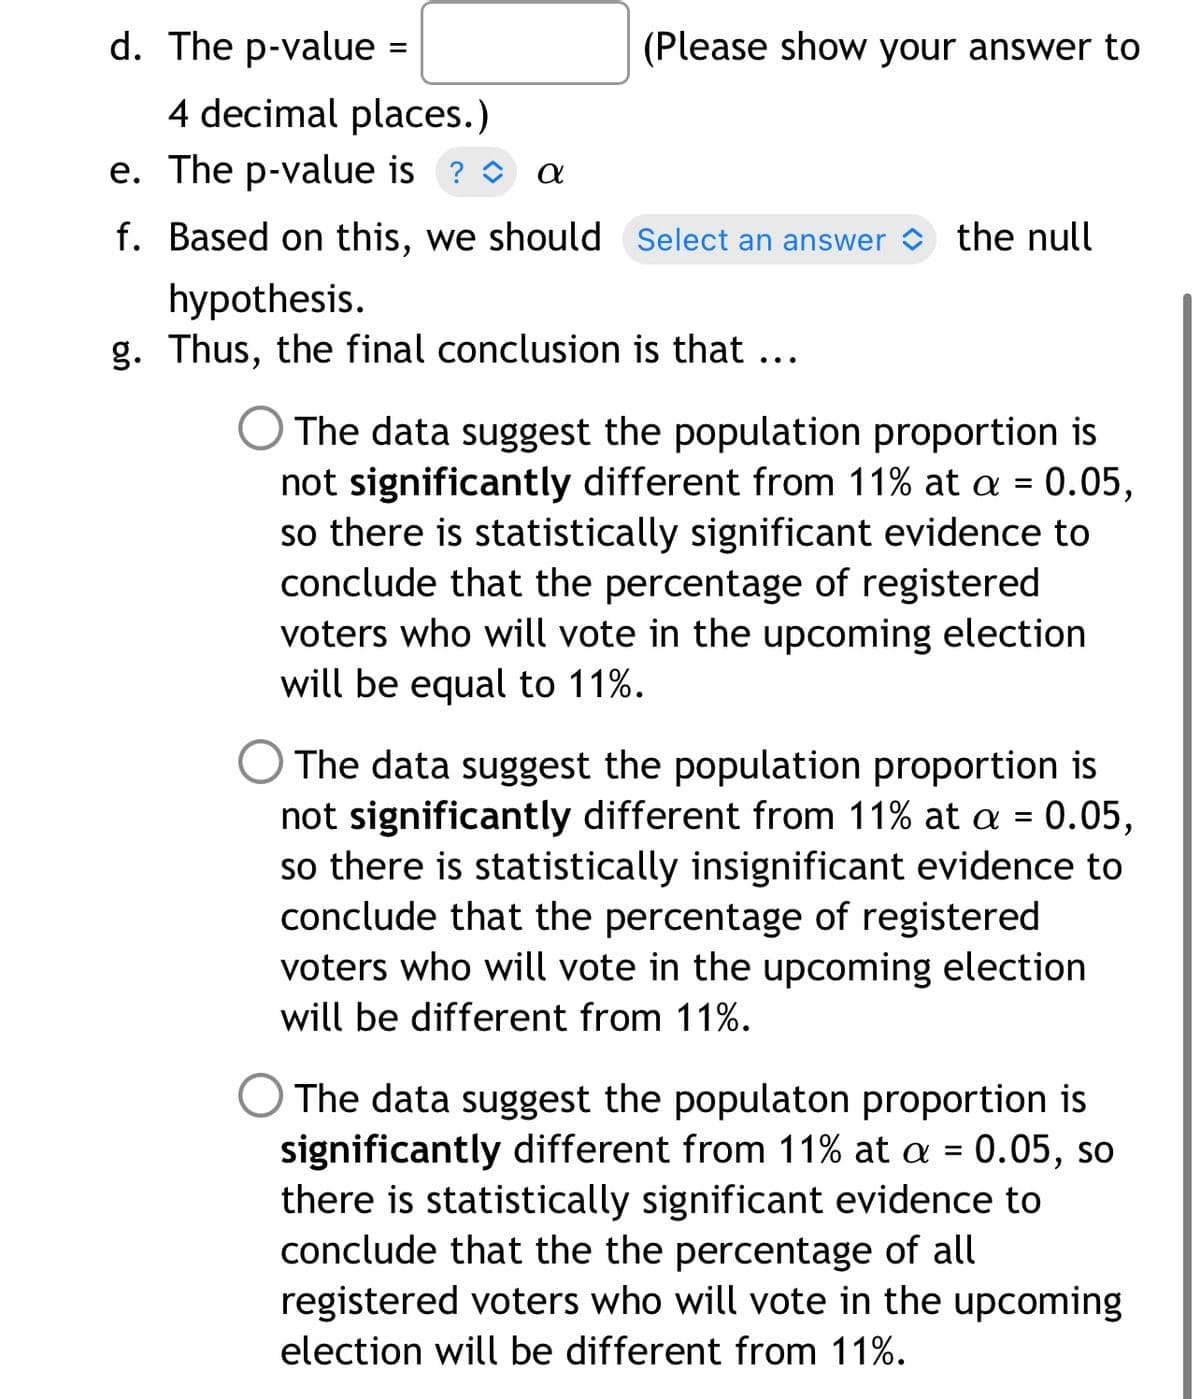 d. The p-value =
(Please show your answer to
4 decimal places.)
e. The p-value is ? o a
f. Based on this, we should Select an answer
the null
hypothesis.
g. Thus, the final conclusion is that ...
O The data suggest the population proportion is
not significantly different from 11% at a = 0.05,
so there is statistically significant evidence to
conclude that the percentage of registered
voters who will vote in the upcoming election
will be equal to 11%.
The data suggest the population proportion is
not significantly different from 11% at a = 0.05,
so there is statistically insignificant evidence to
conclude that the percentage of registered
voters who will vote in the upcoming election
will be different from 11%.
The data suggest the populaton proportion is
significantly different from 11% at a = 0.05, so
there is statistically significant evidence to
conclude that the the percentage of all
registered voters who will vote in the upcoming
election will be different from 11%.
